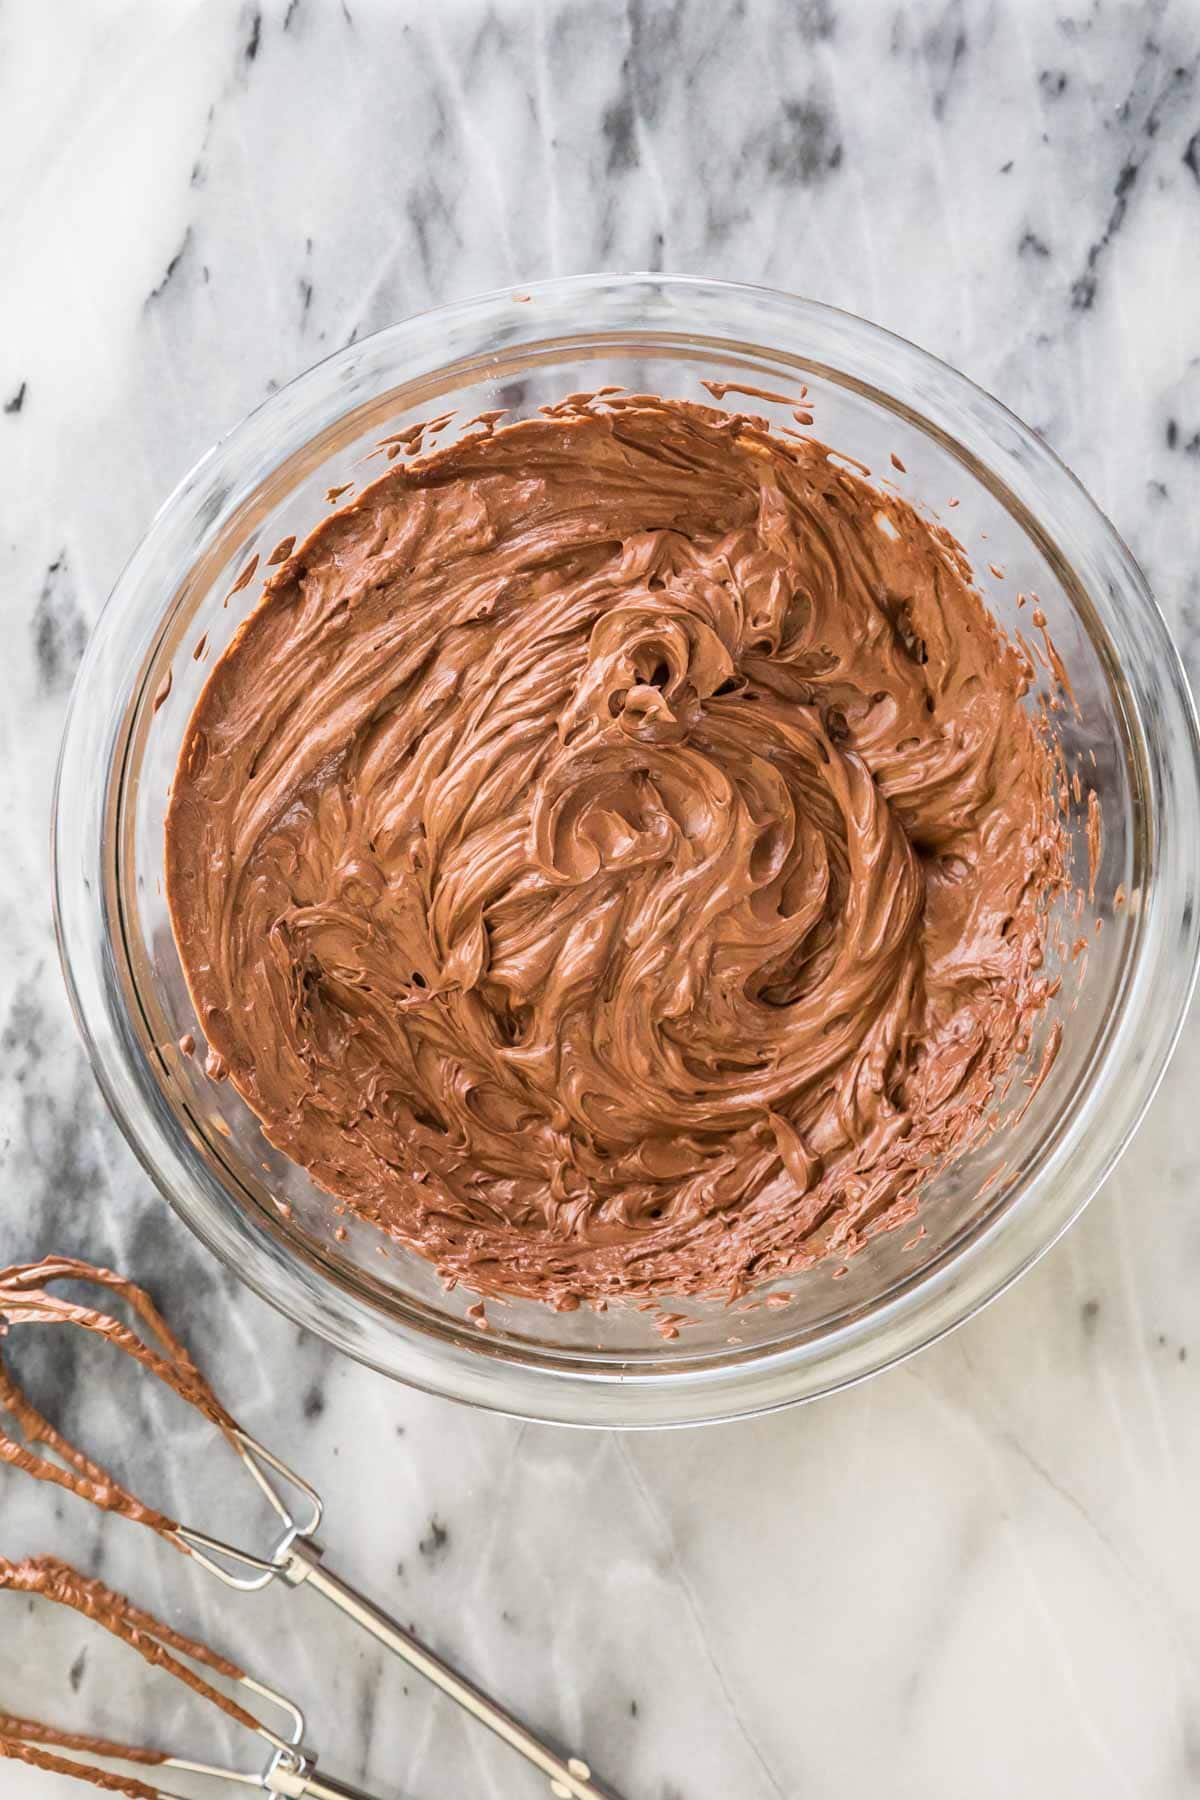 Chocolate ganache whipped to a frosting consistency for ganache frosting